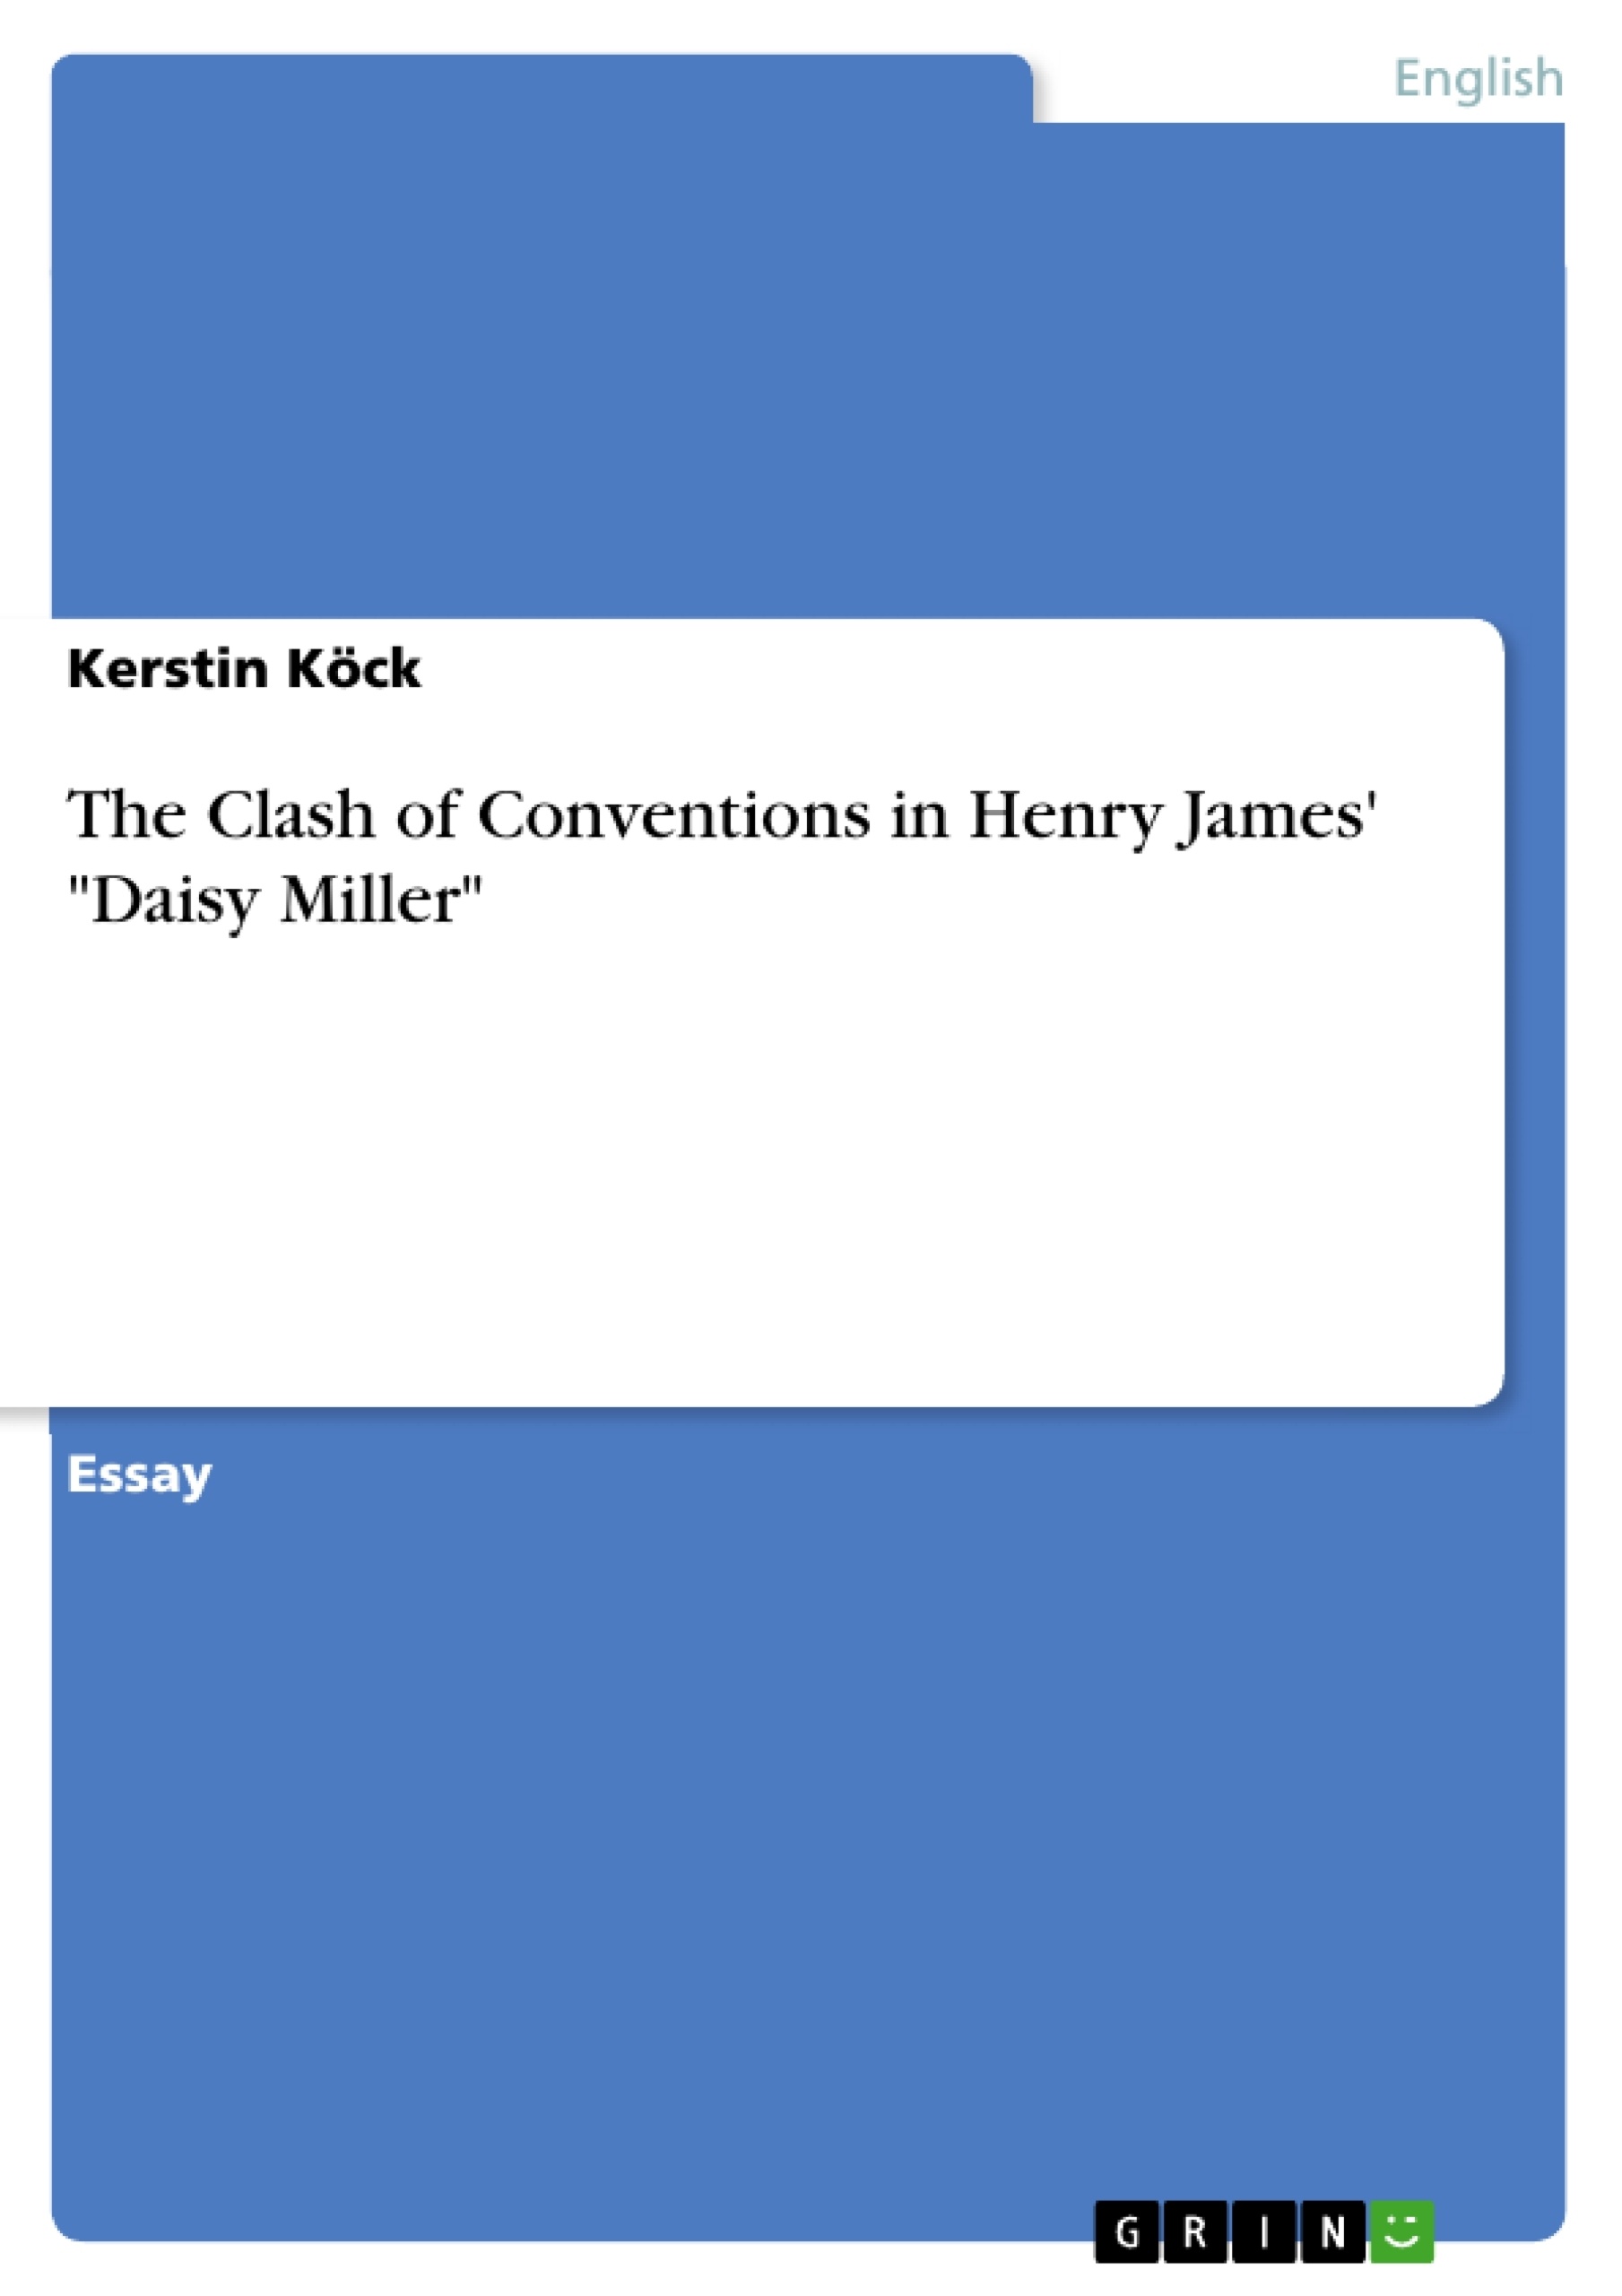 Title: The Clash of Conventions in Henry James' "Daisy Miller"